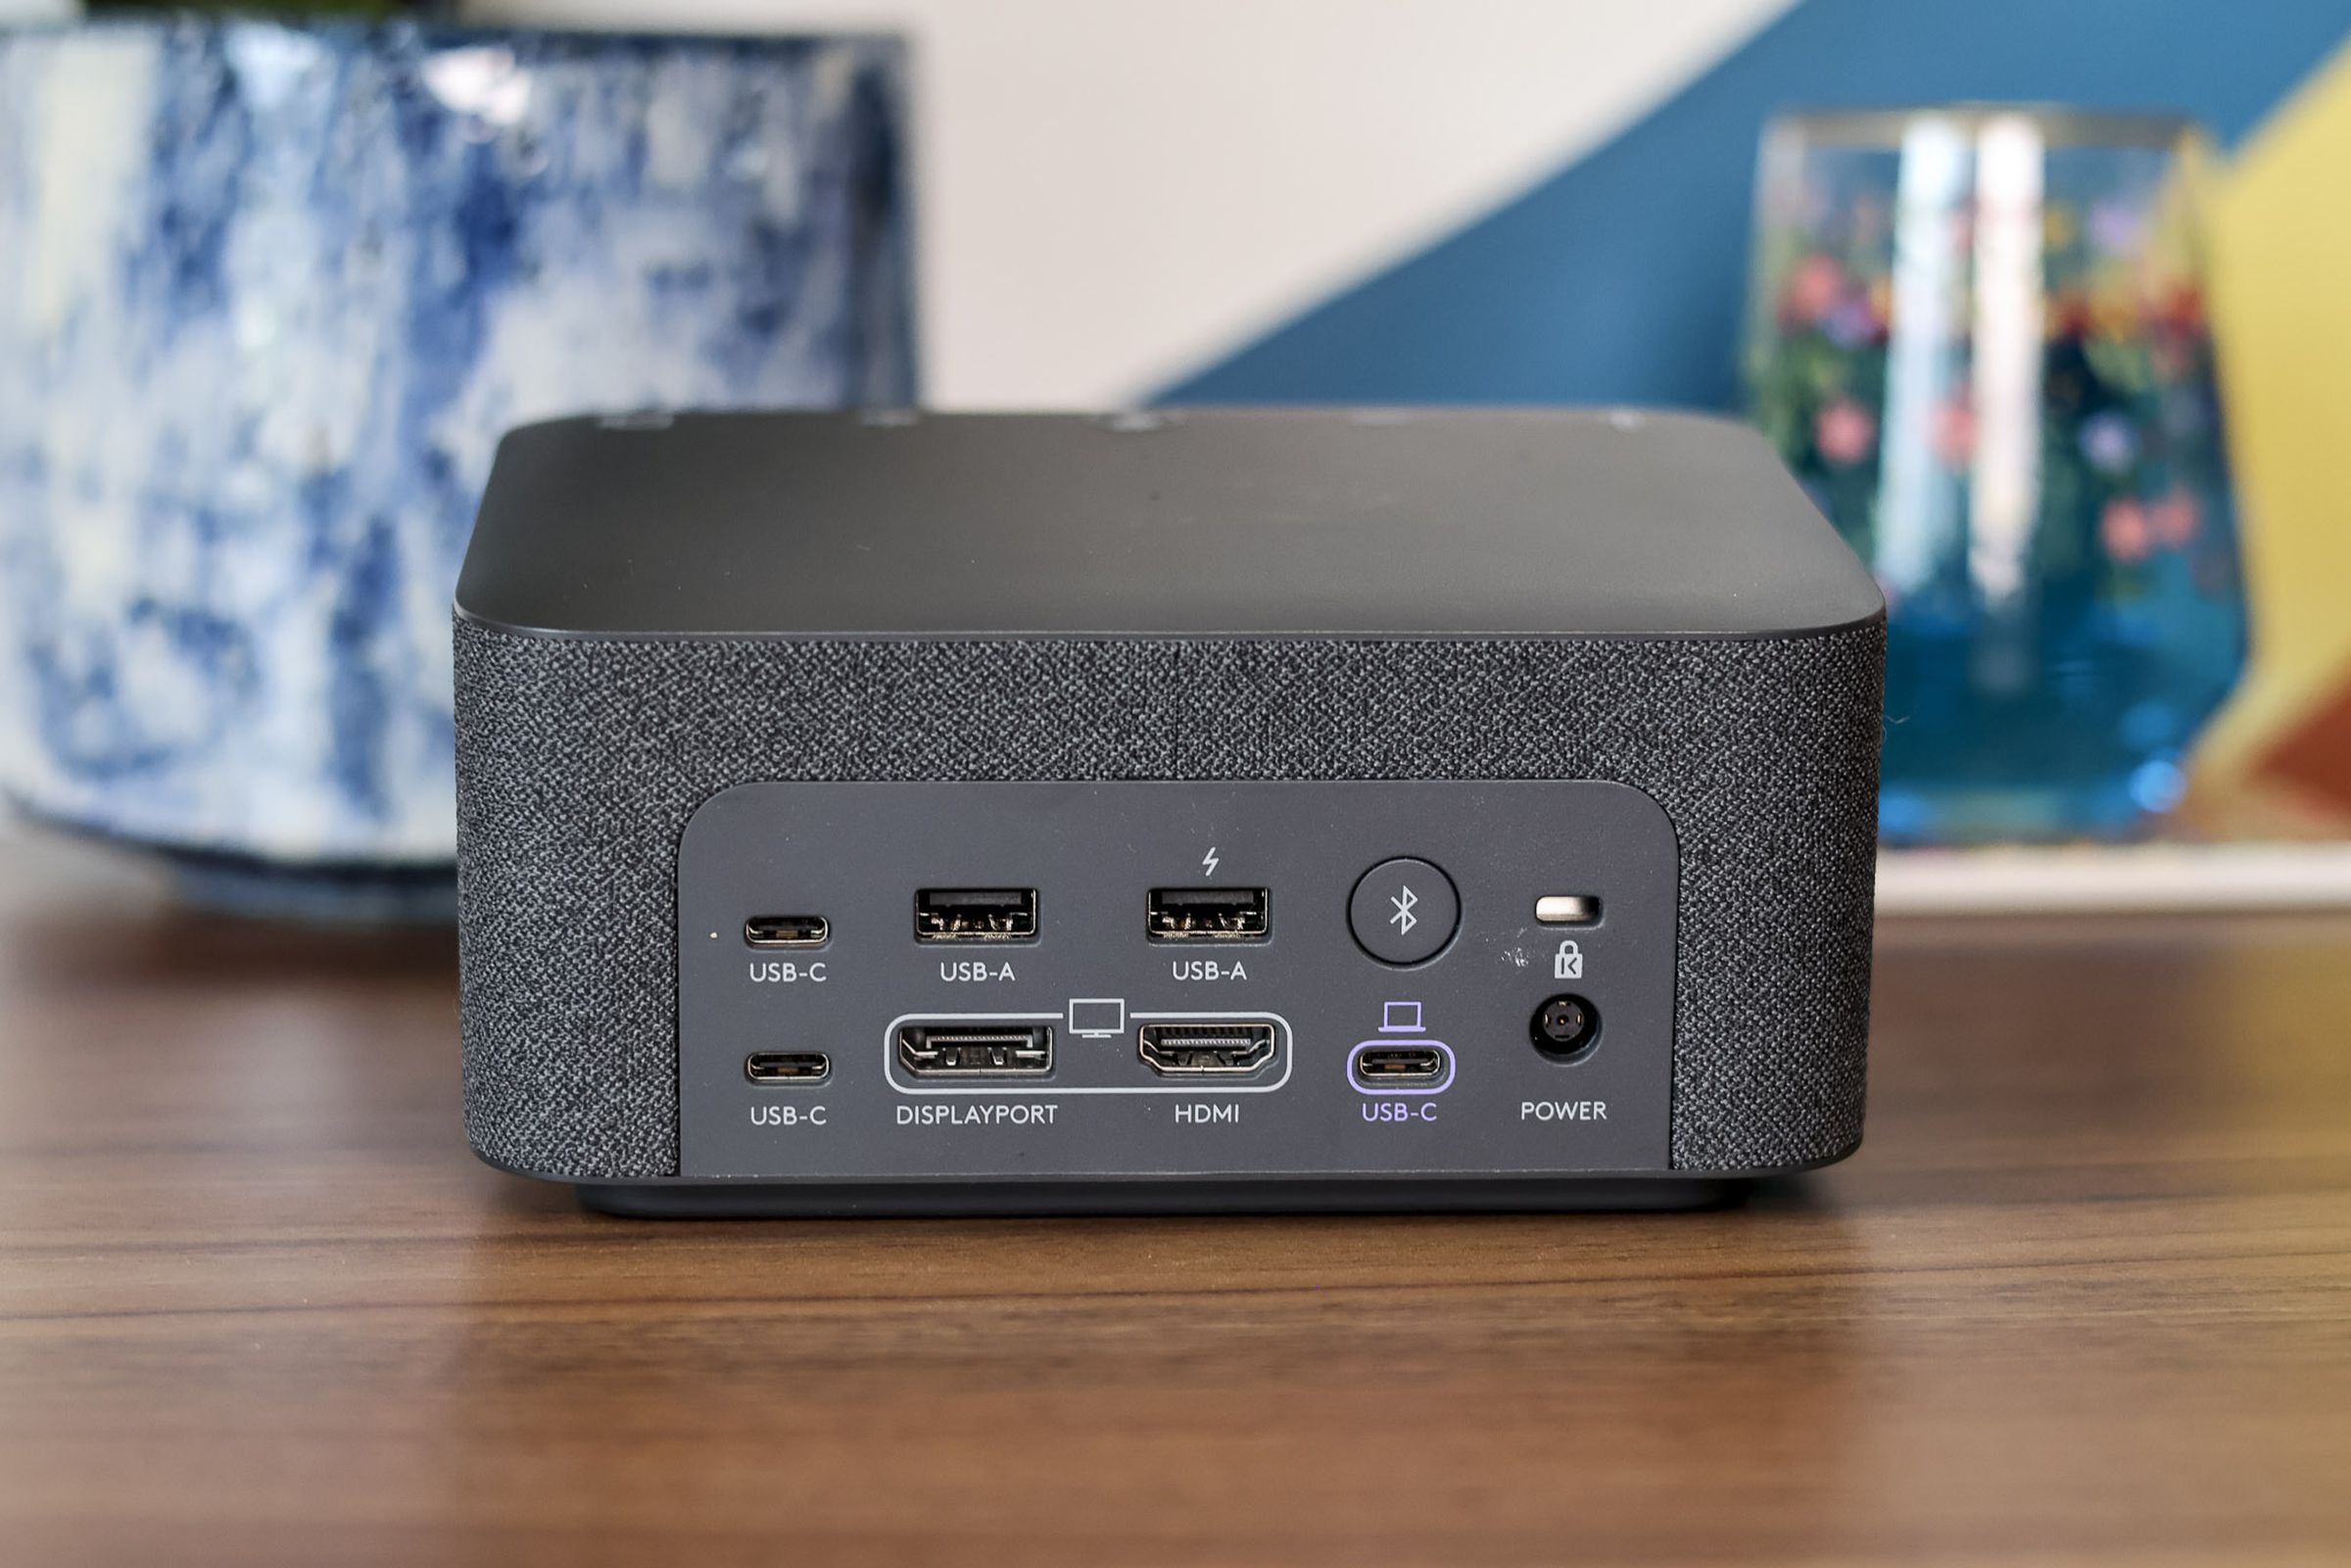 A photograph of the Logitech Logi Dock as viewed from the rear, displaying its various ports and connections.